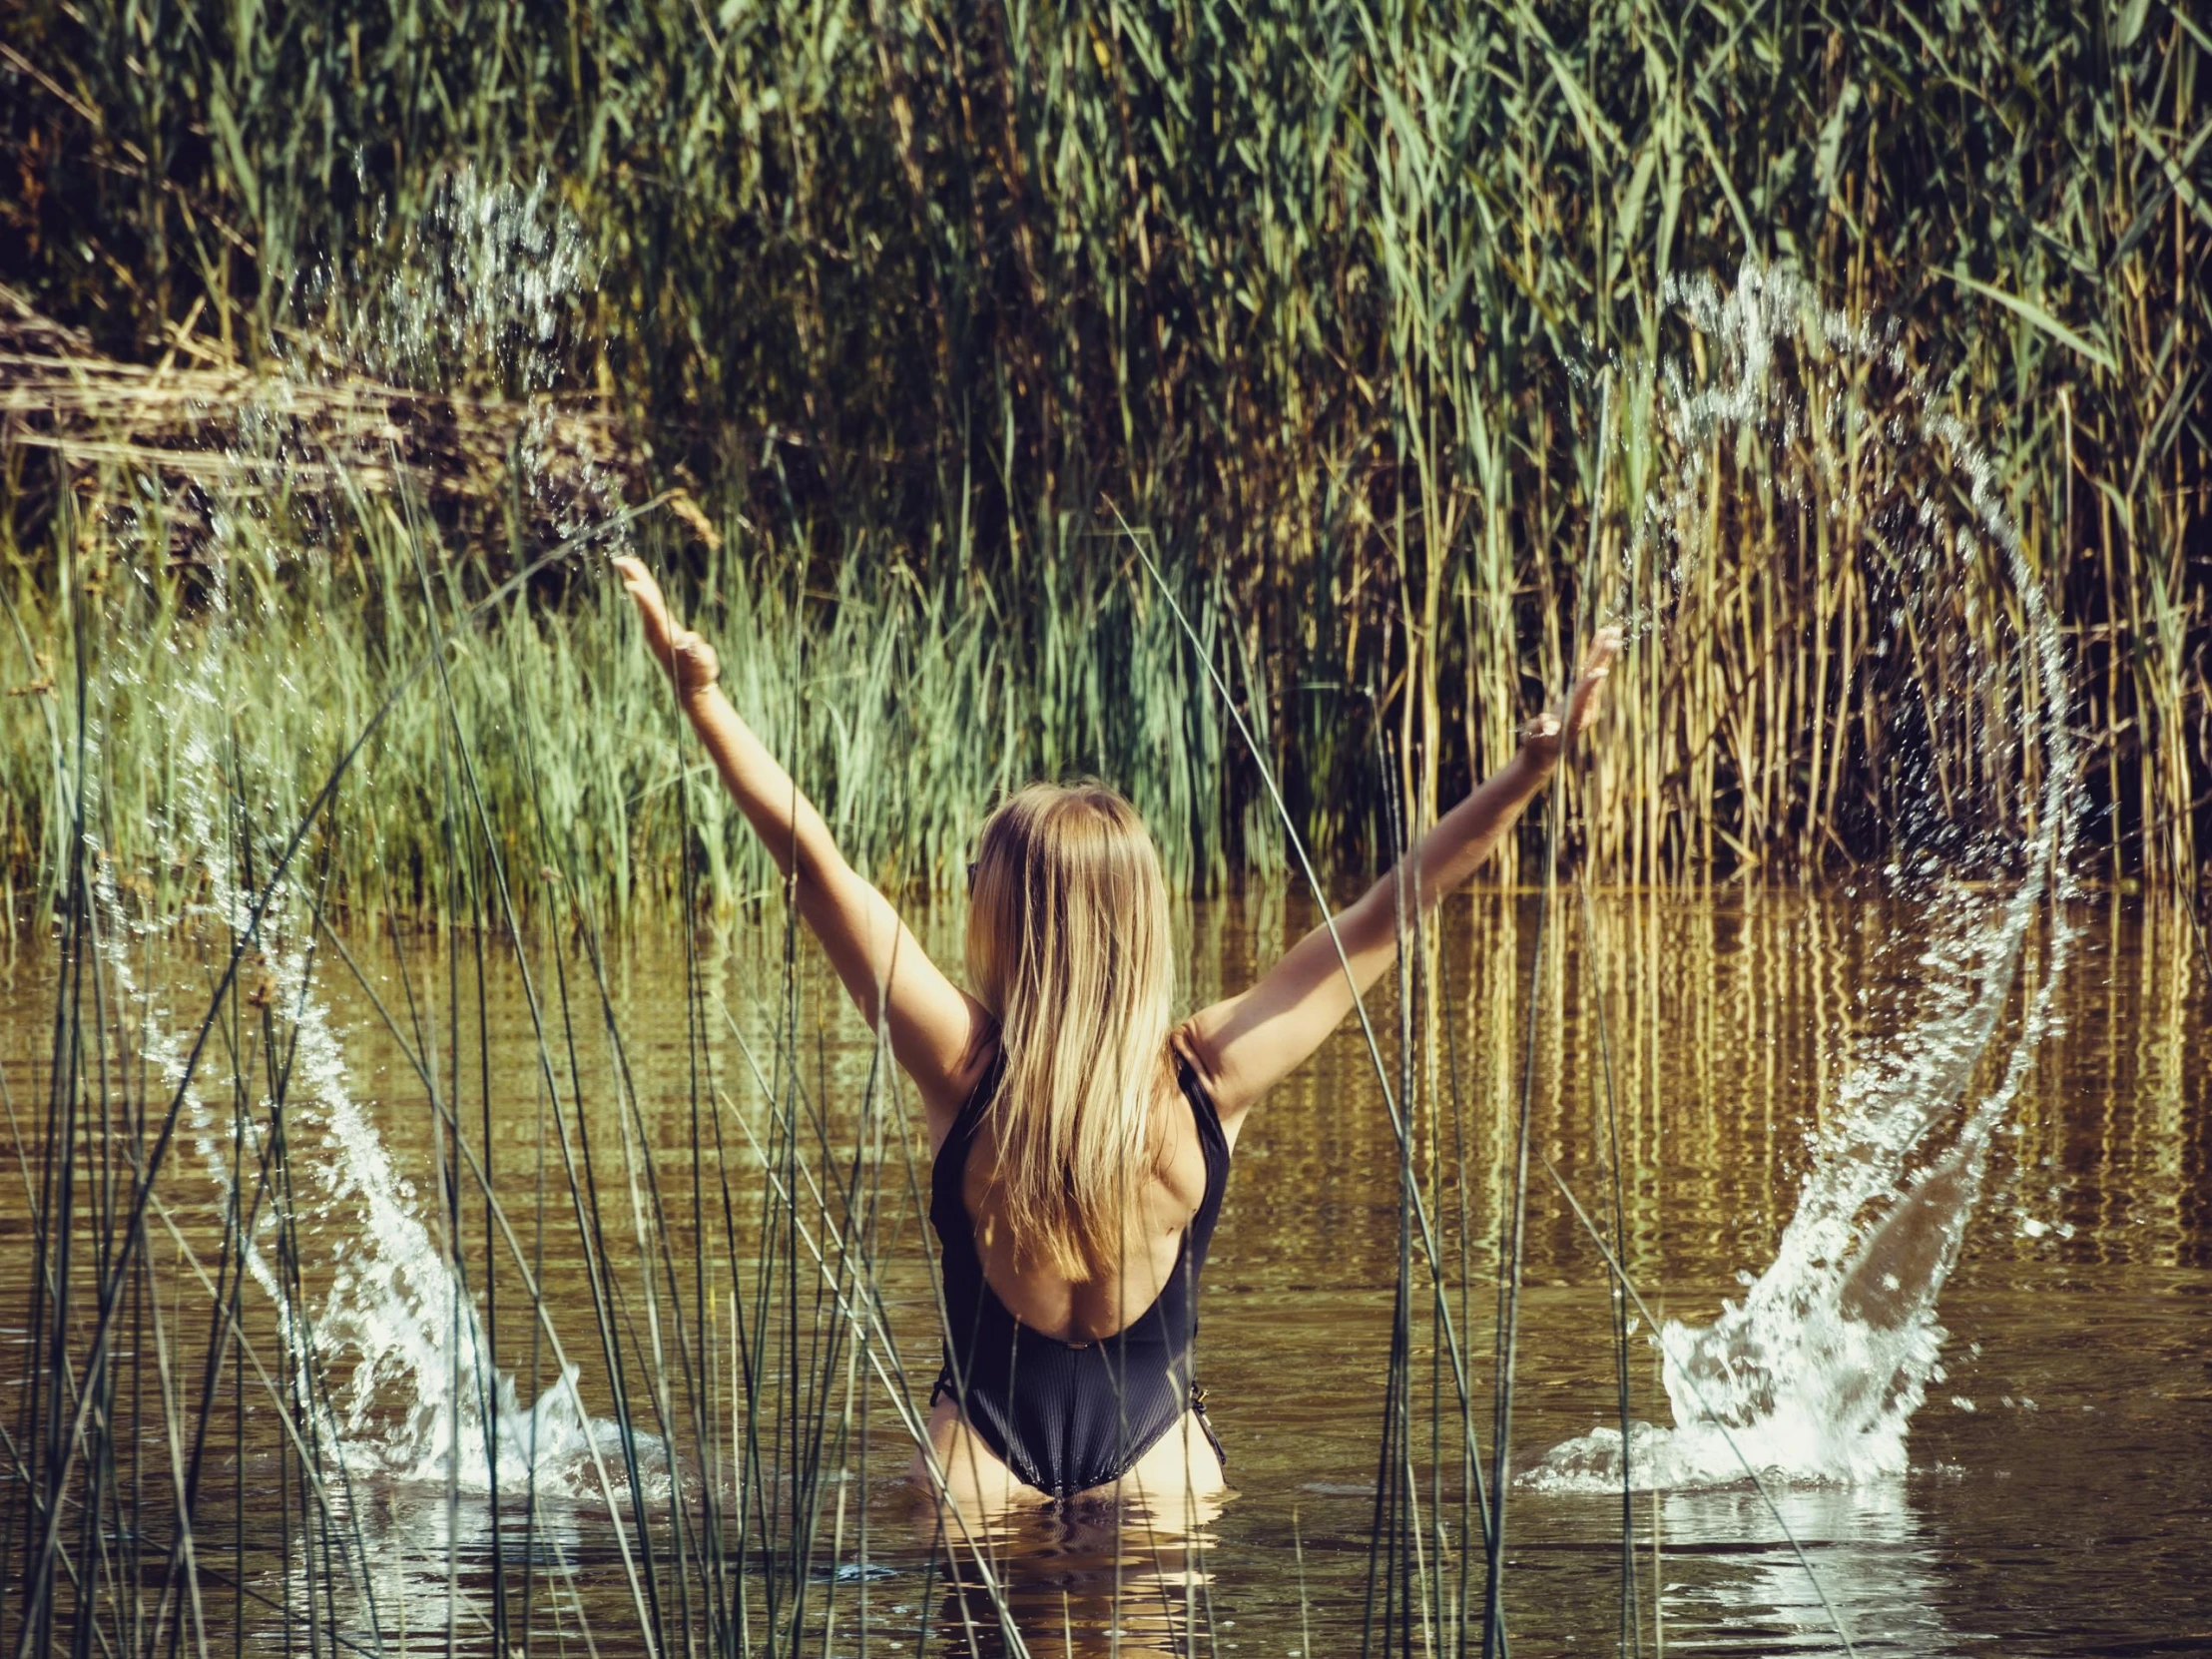 a girl wading in water holding her arms up as she is surrounded by water plants